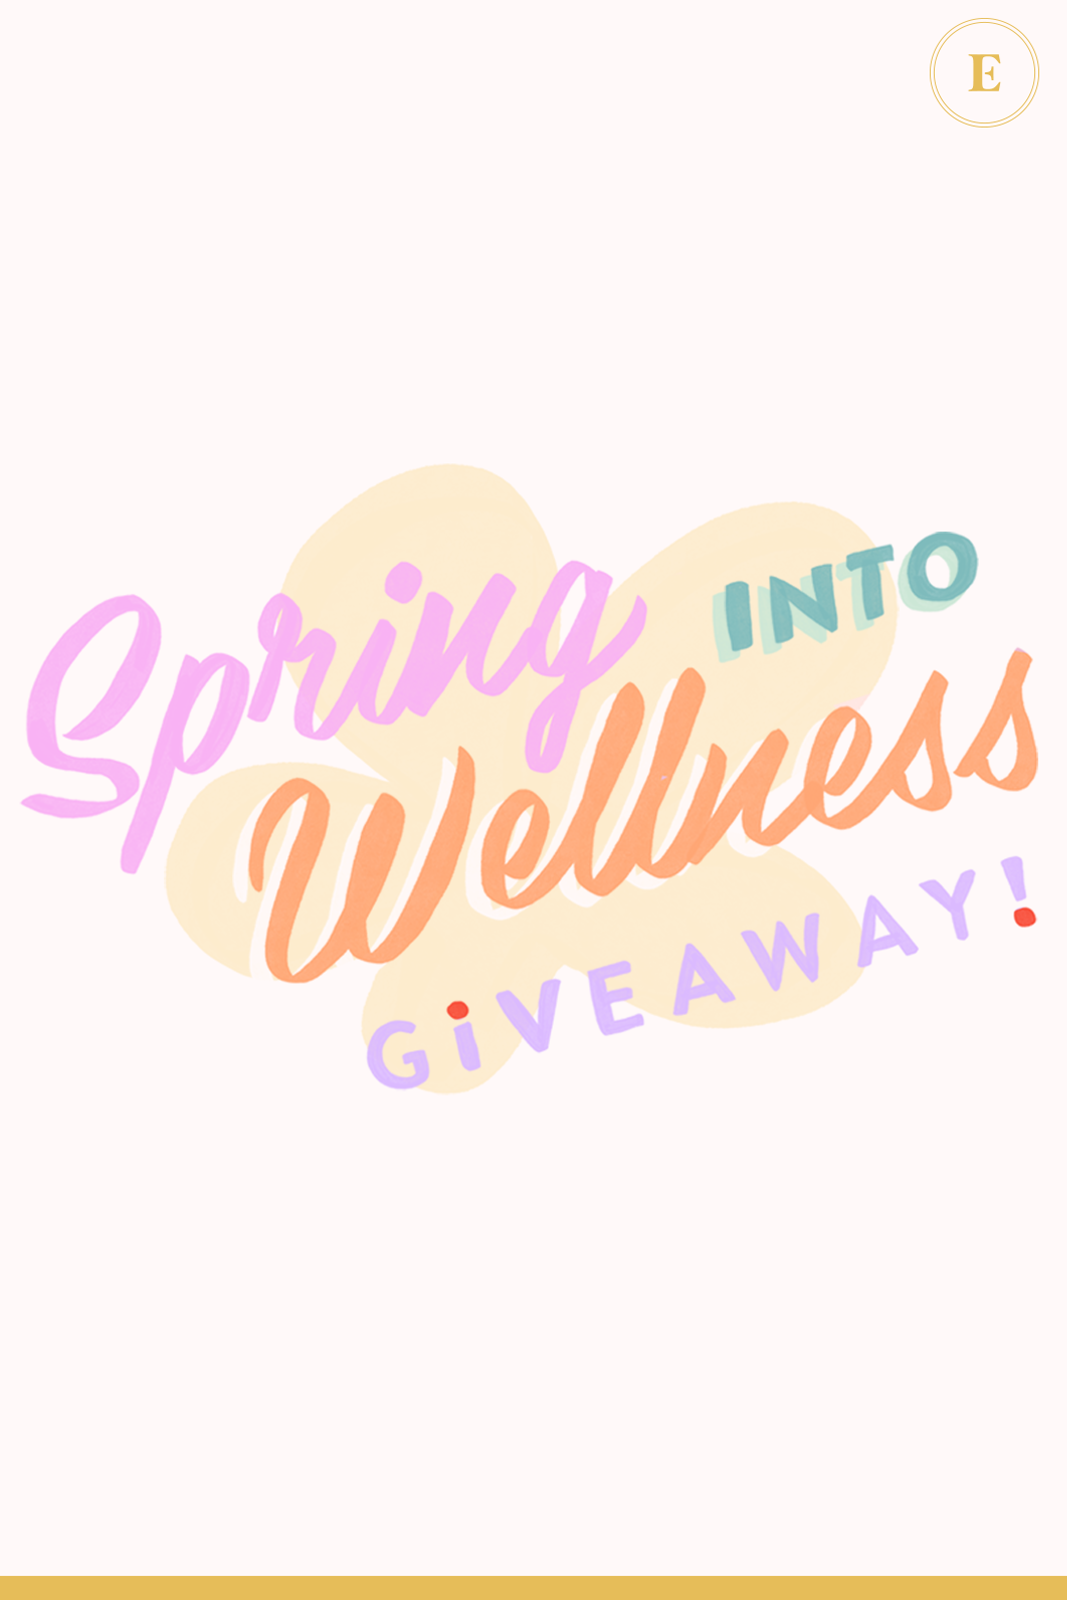 As promised the second wellness giveaway is now open! Enter to win a self care bundle full of the sold out Anthropologie wellness collection!